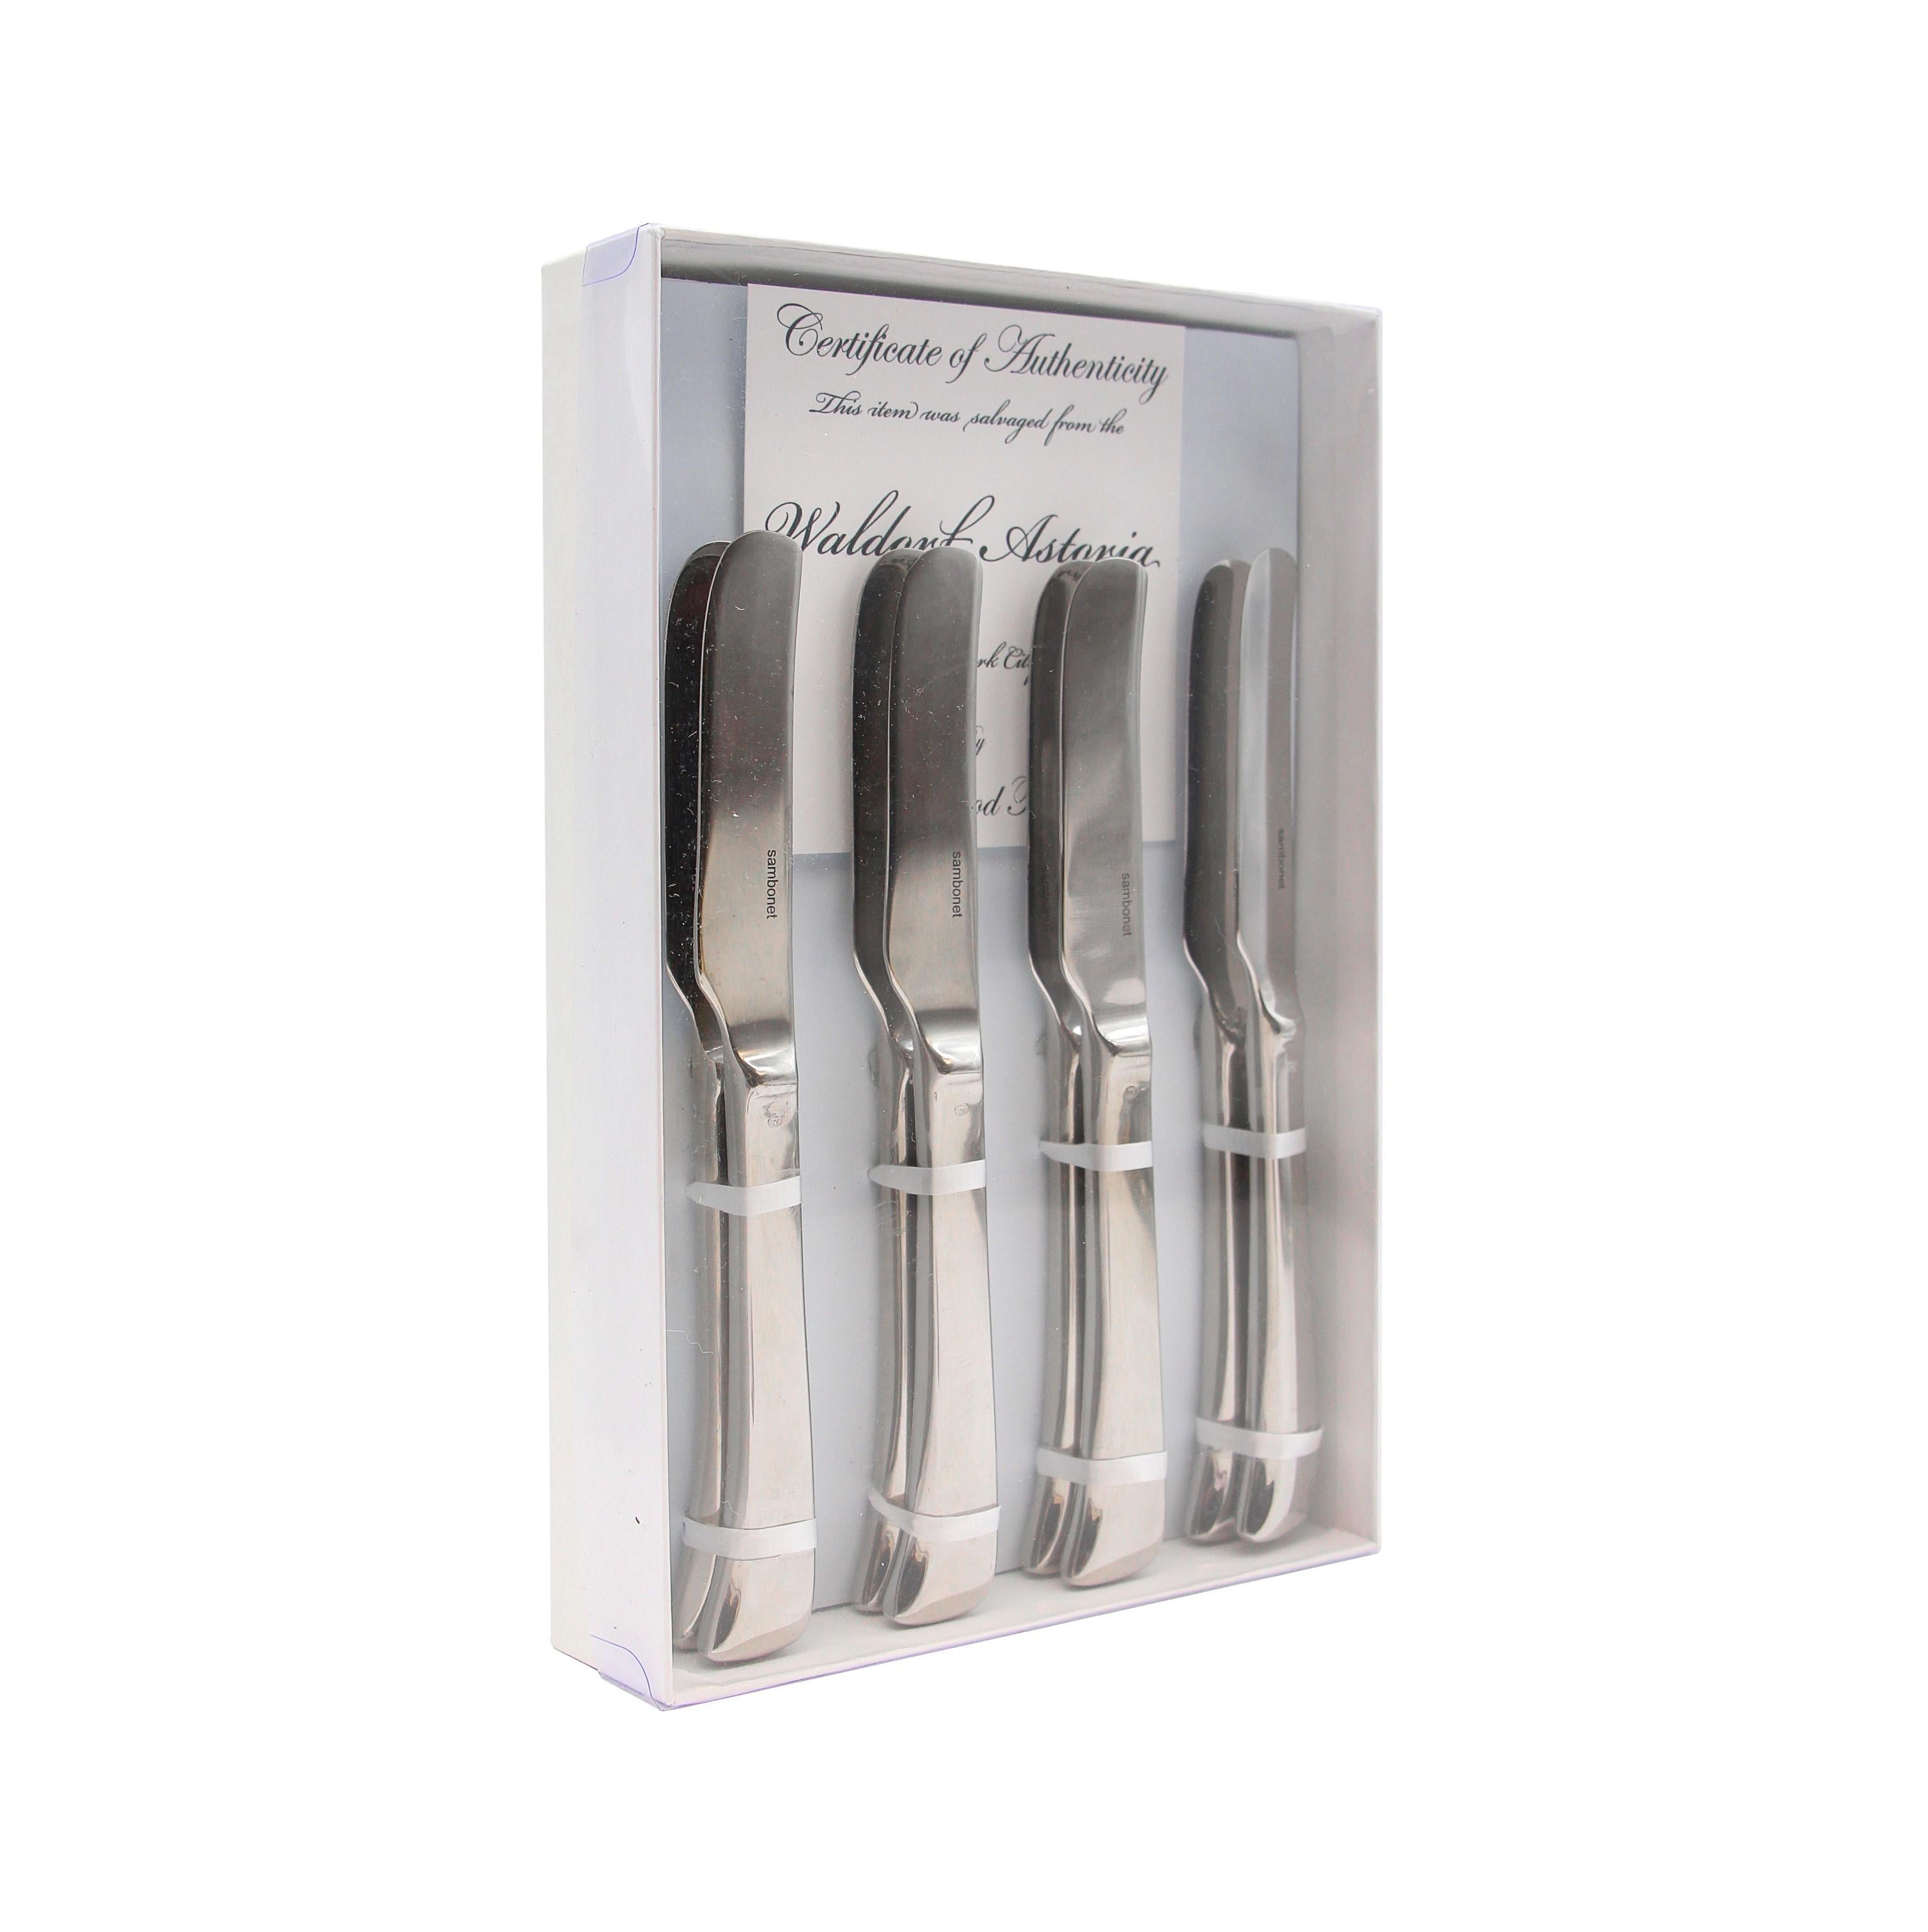 High quality stainless steel used butter knife flatware gift set. Made by Sambonet in their Imagine style. These pieces were used in the La Chin restaurant of the Waldorf Astoria Hotel on Park Ave in NYC. This set includes a Waldorf Astoria